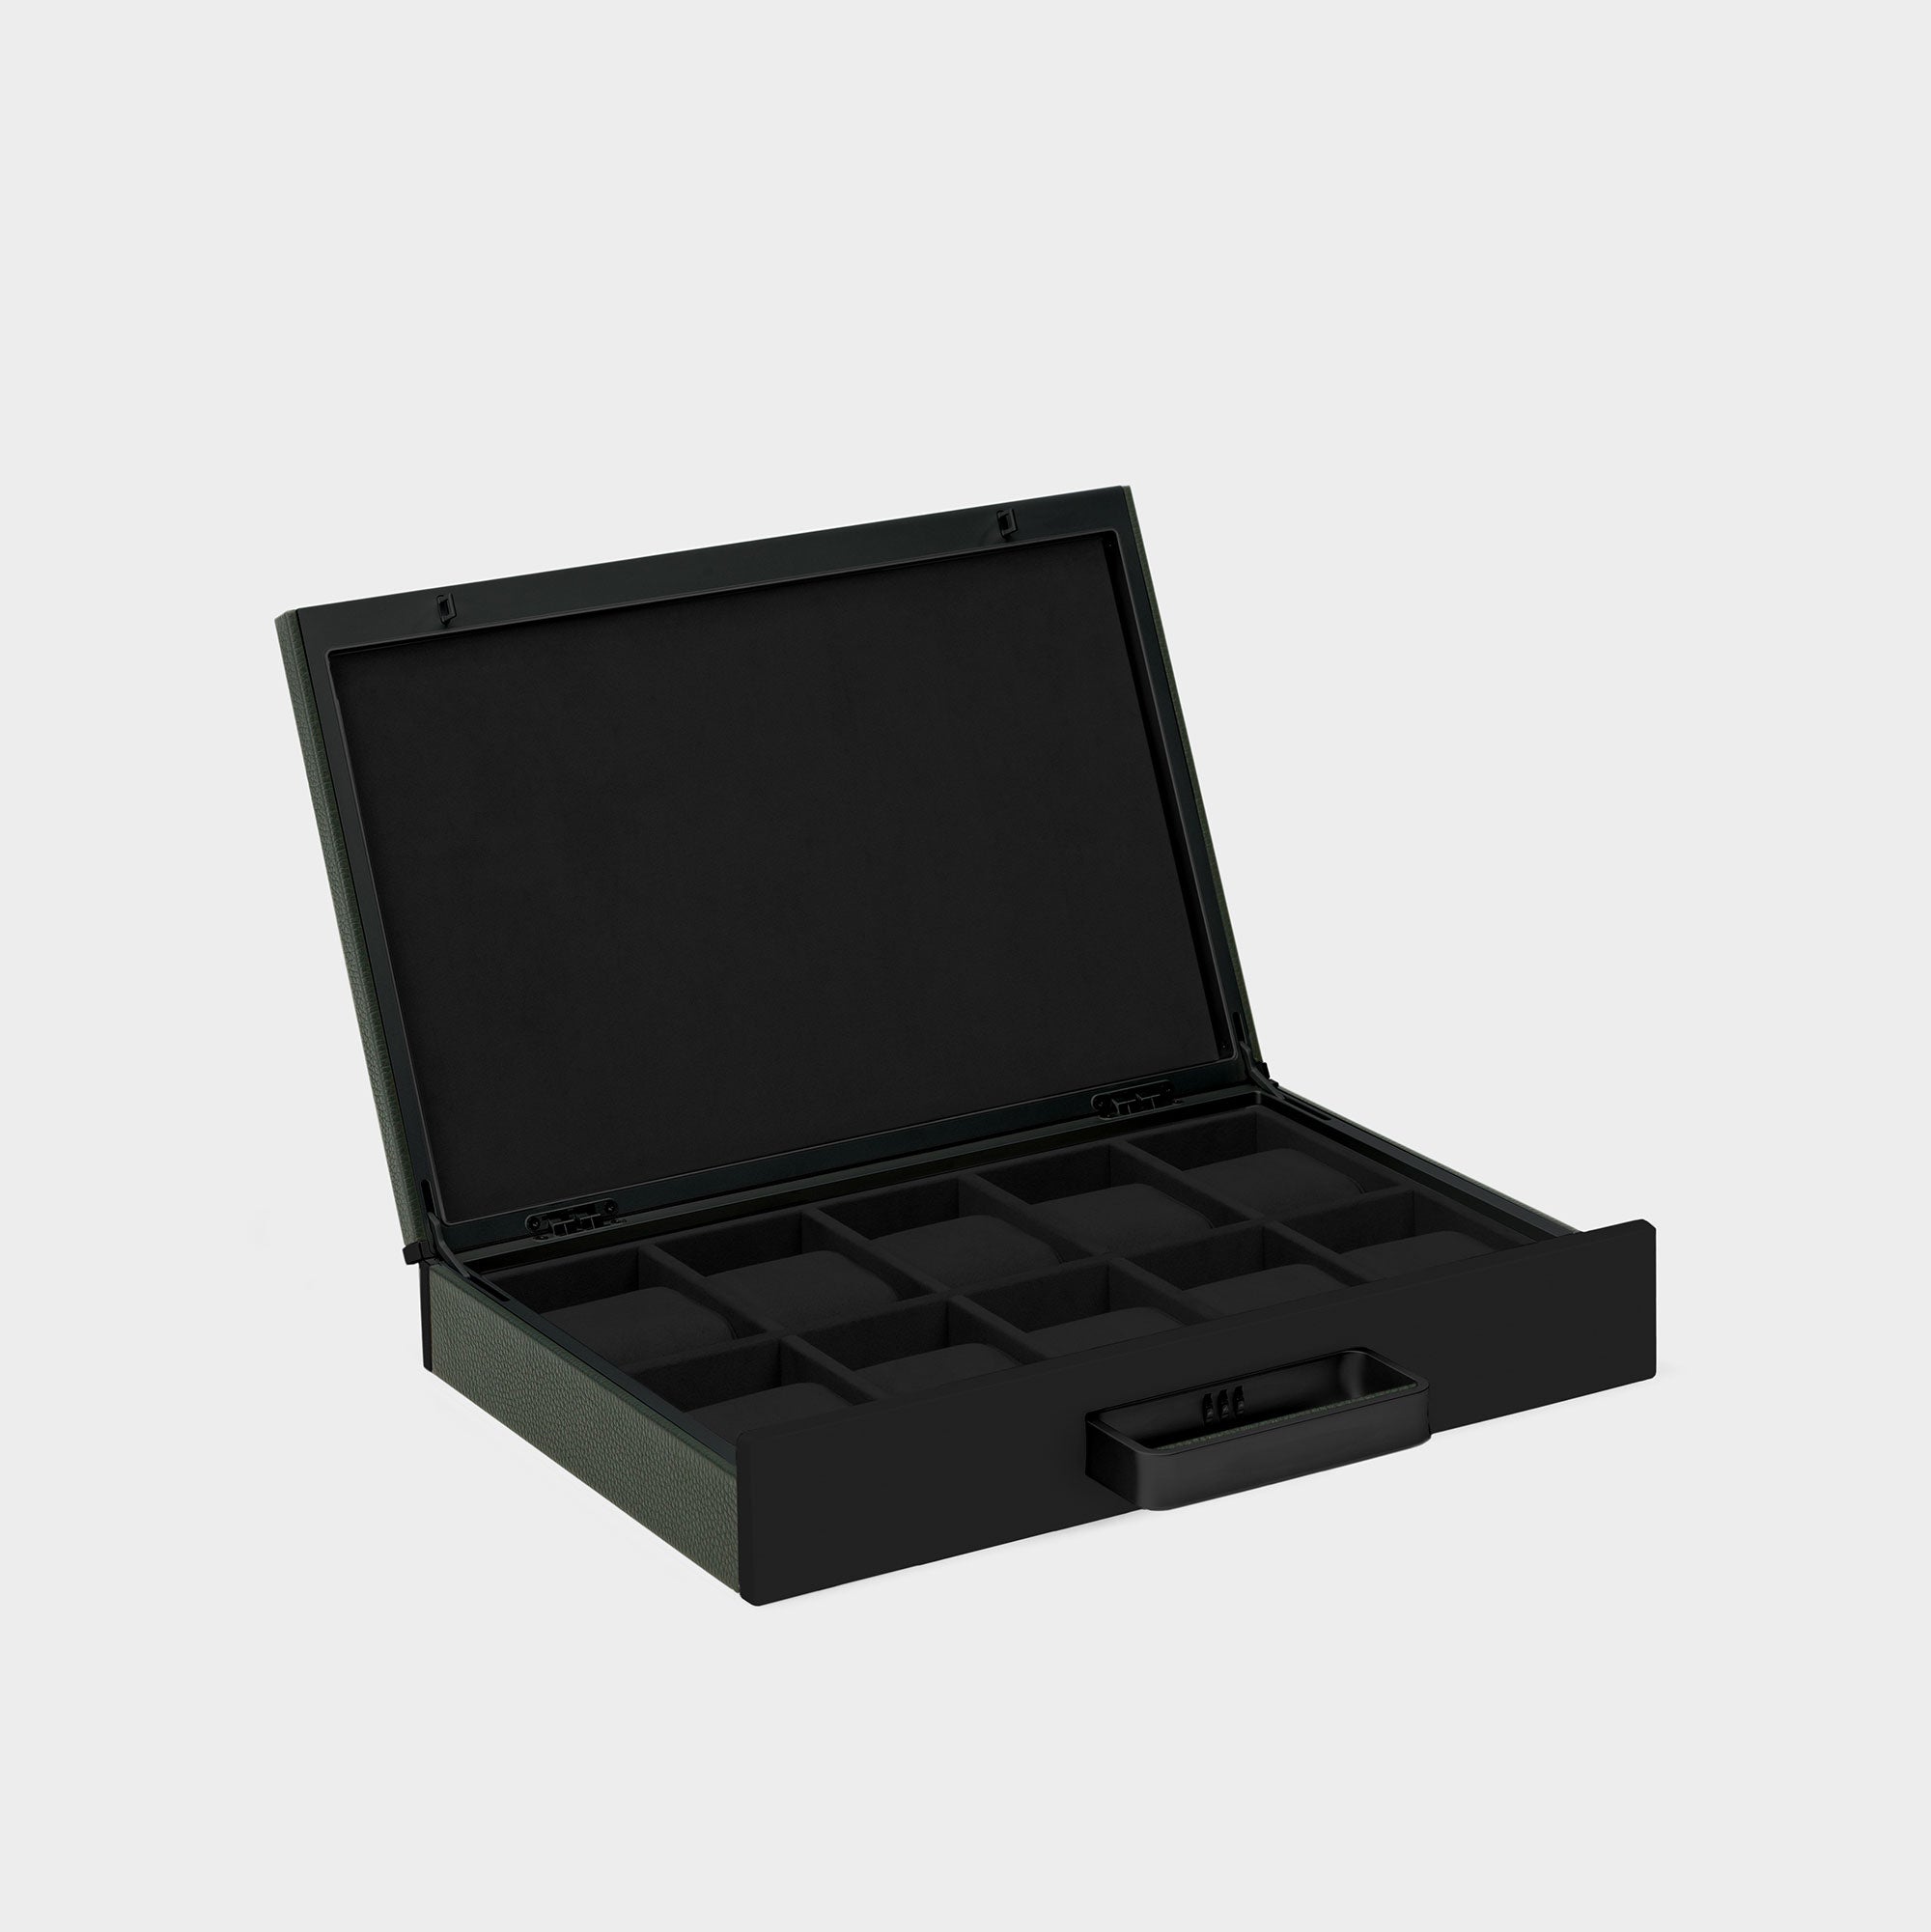 Handmade watch briefcase for up to 10 watches. Made from khaki French leather, black anodzied aluminum and carbon fiber, and black Alcantara cushions. 